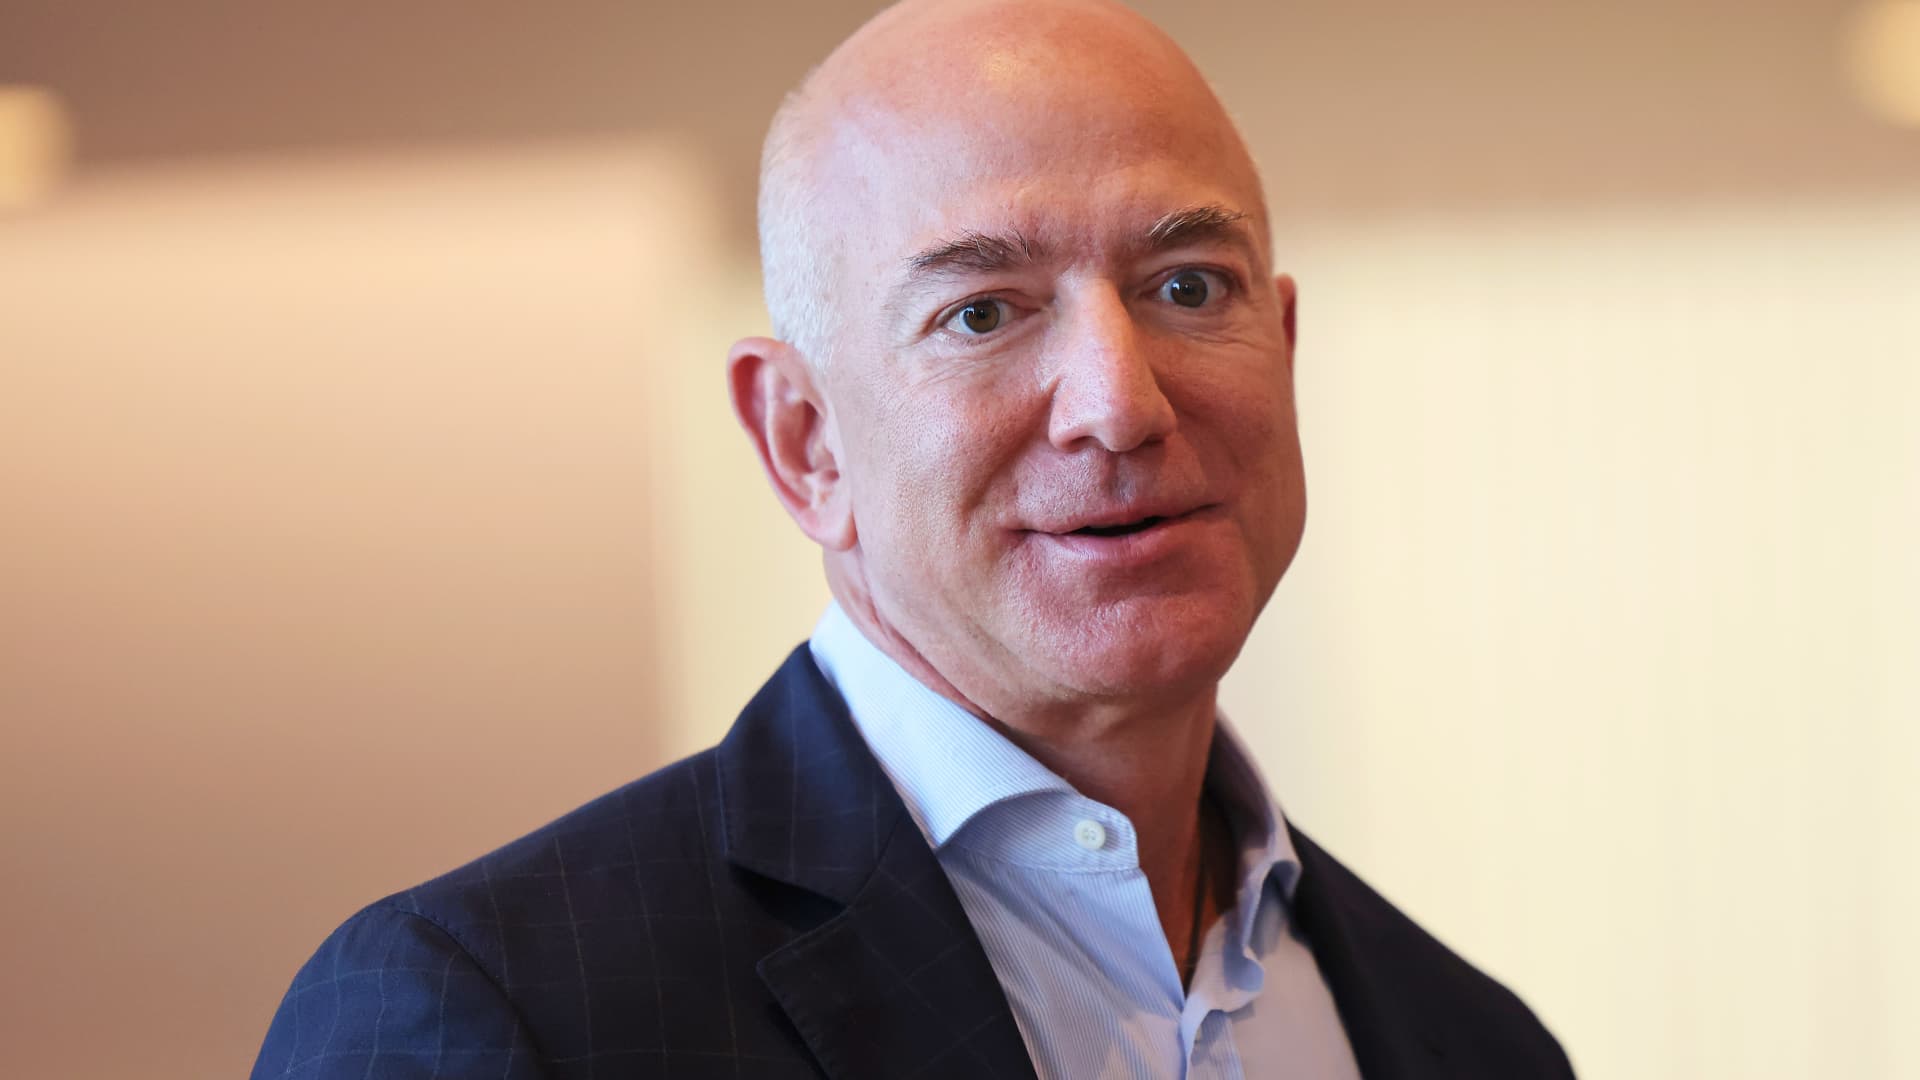 World’s richest people who haven’t signed Giving Pledge: Bezos to Brin